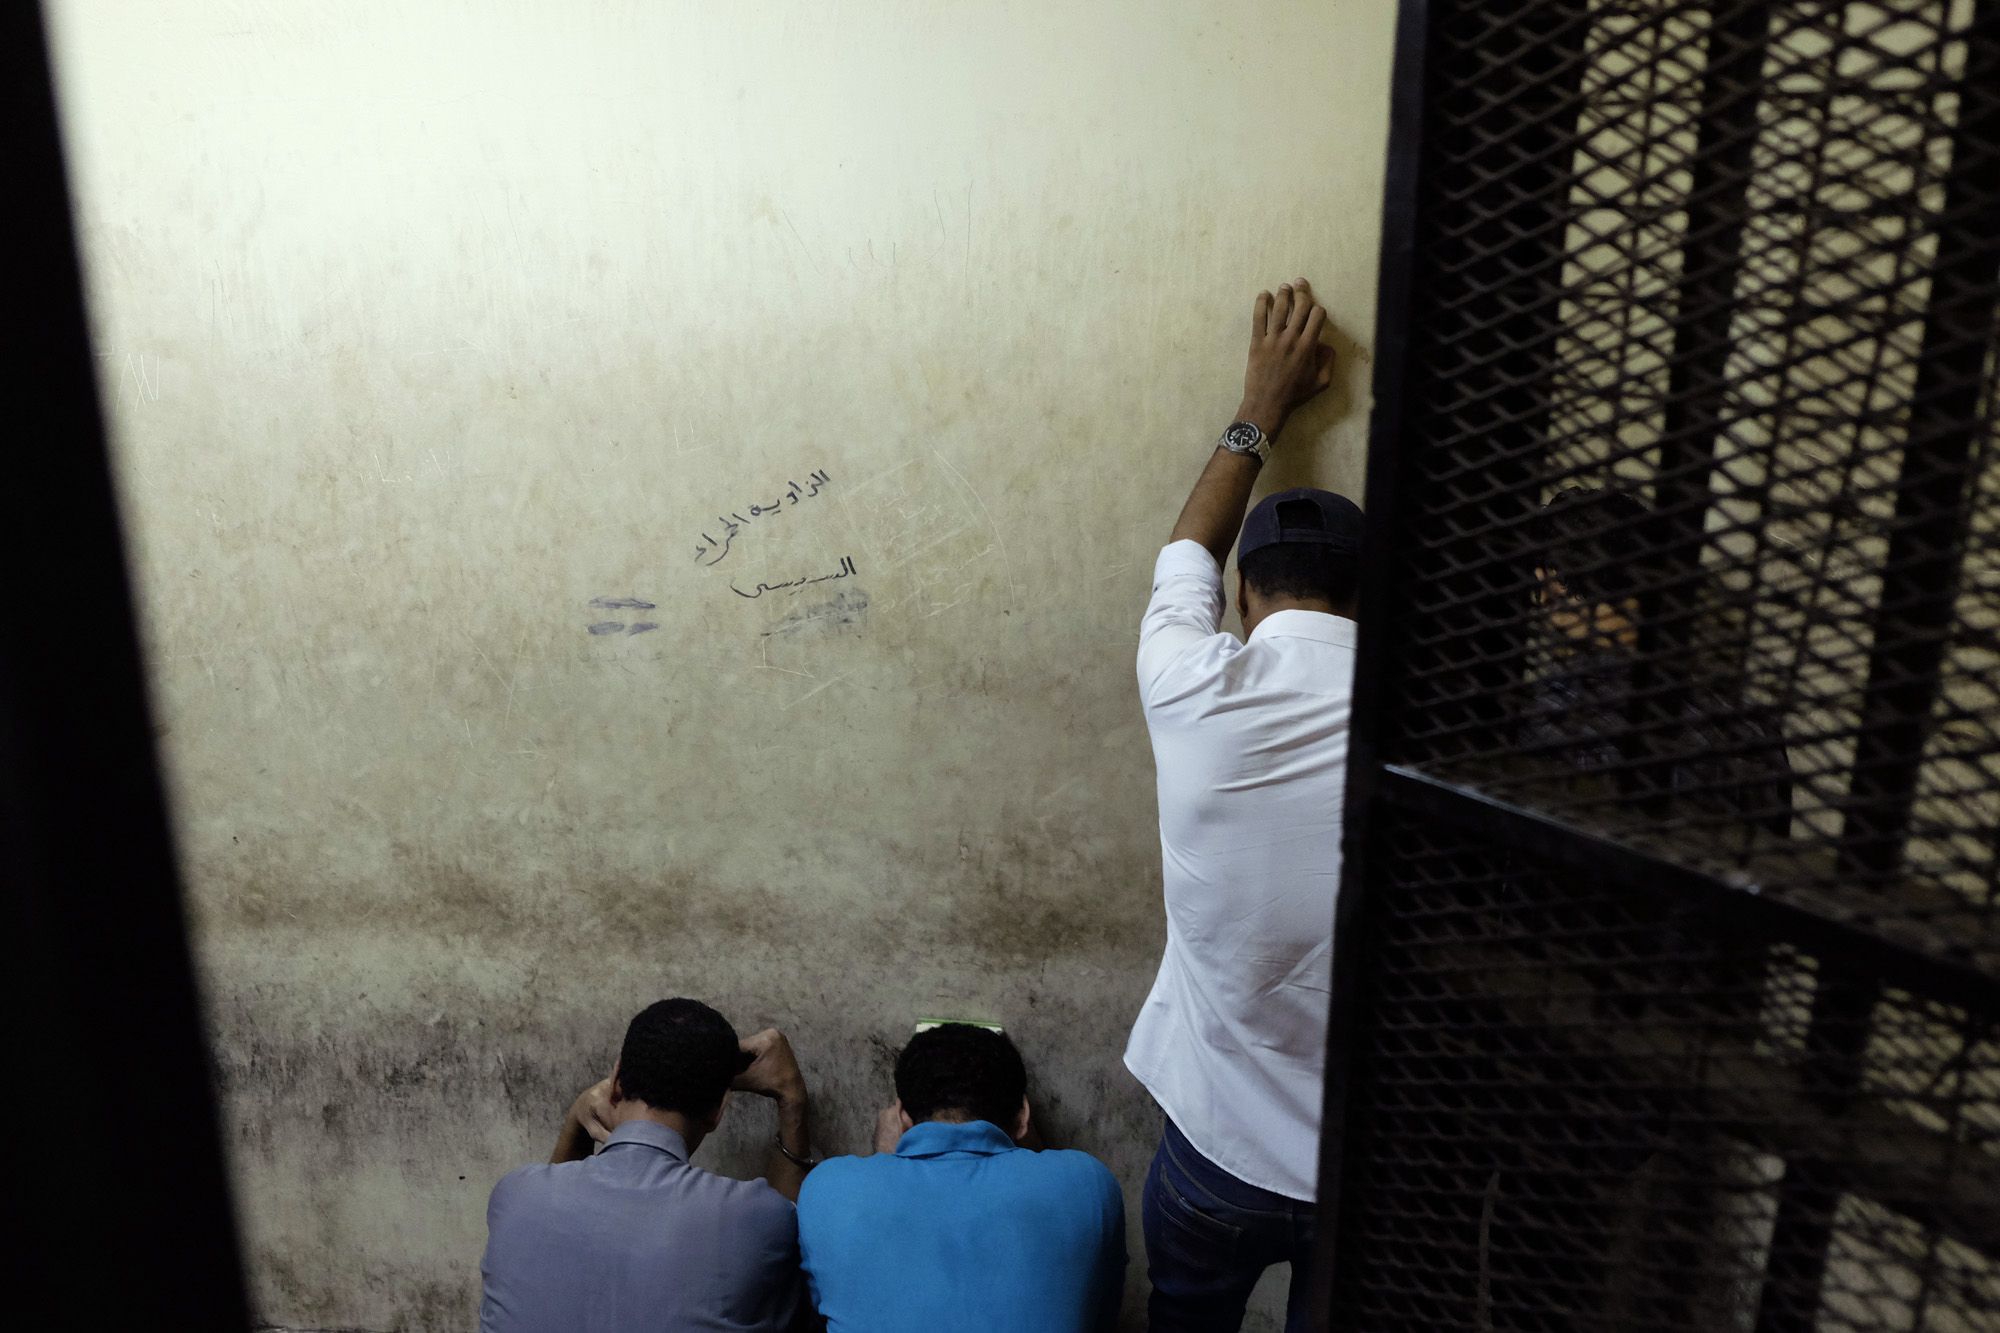 Egyptian men sentenced to life in prison for sexual assaults on women during a number of public rallies in Cairo's iconic Tahrir Square, attend their trial at a court in Cairo, July 16, 2014. (Aly Hazza—El Shorouk/AP)